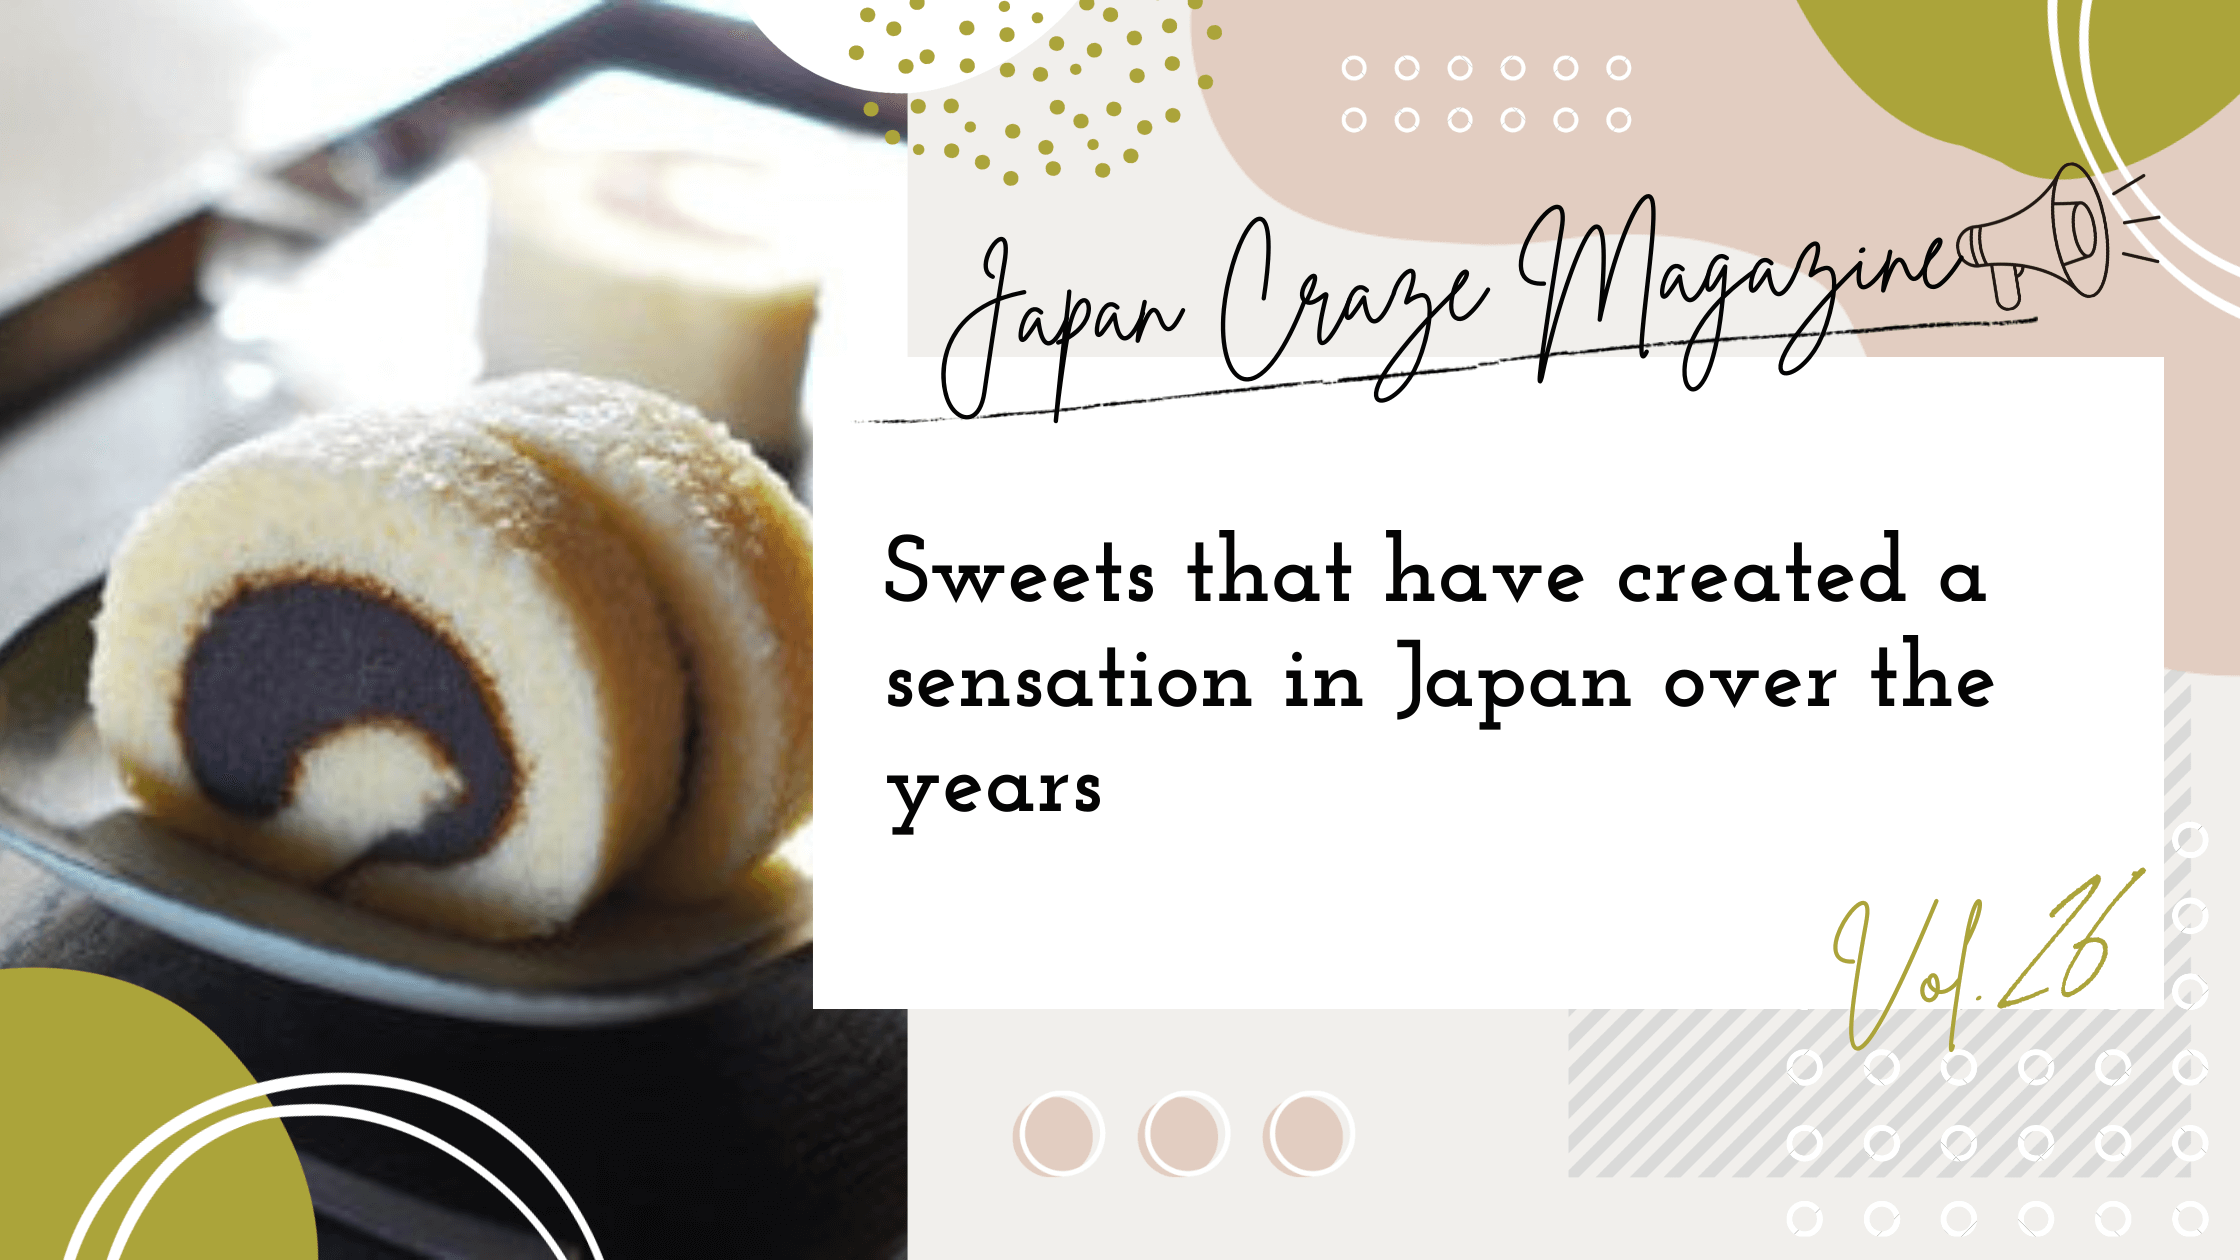 Sweets that have created a sensation in Japan over the years - JAPAN C